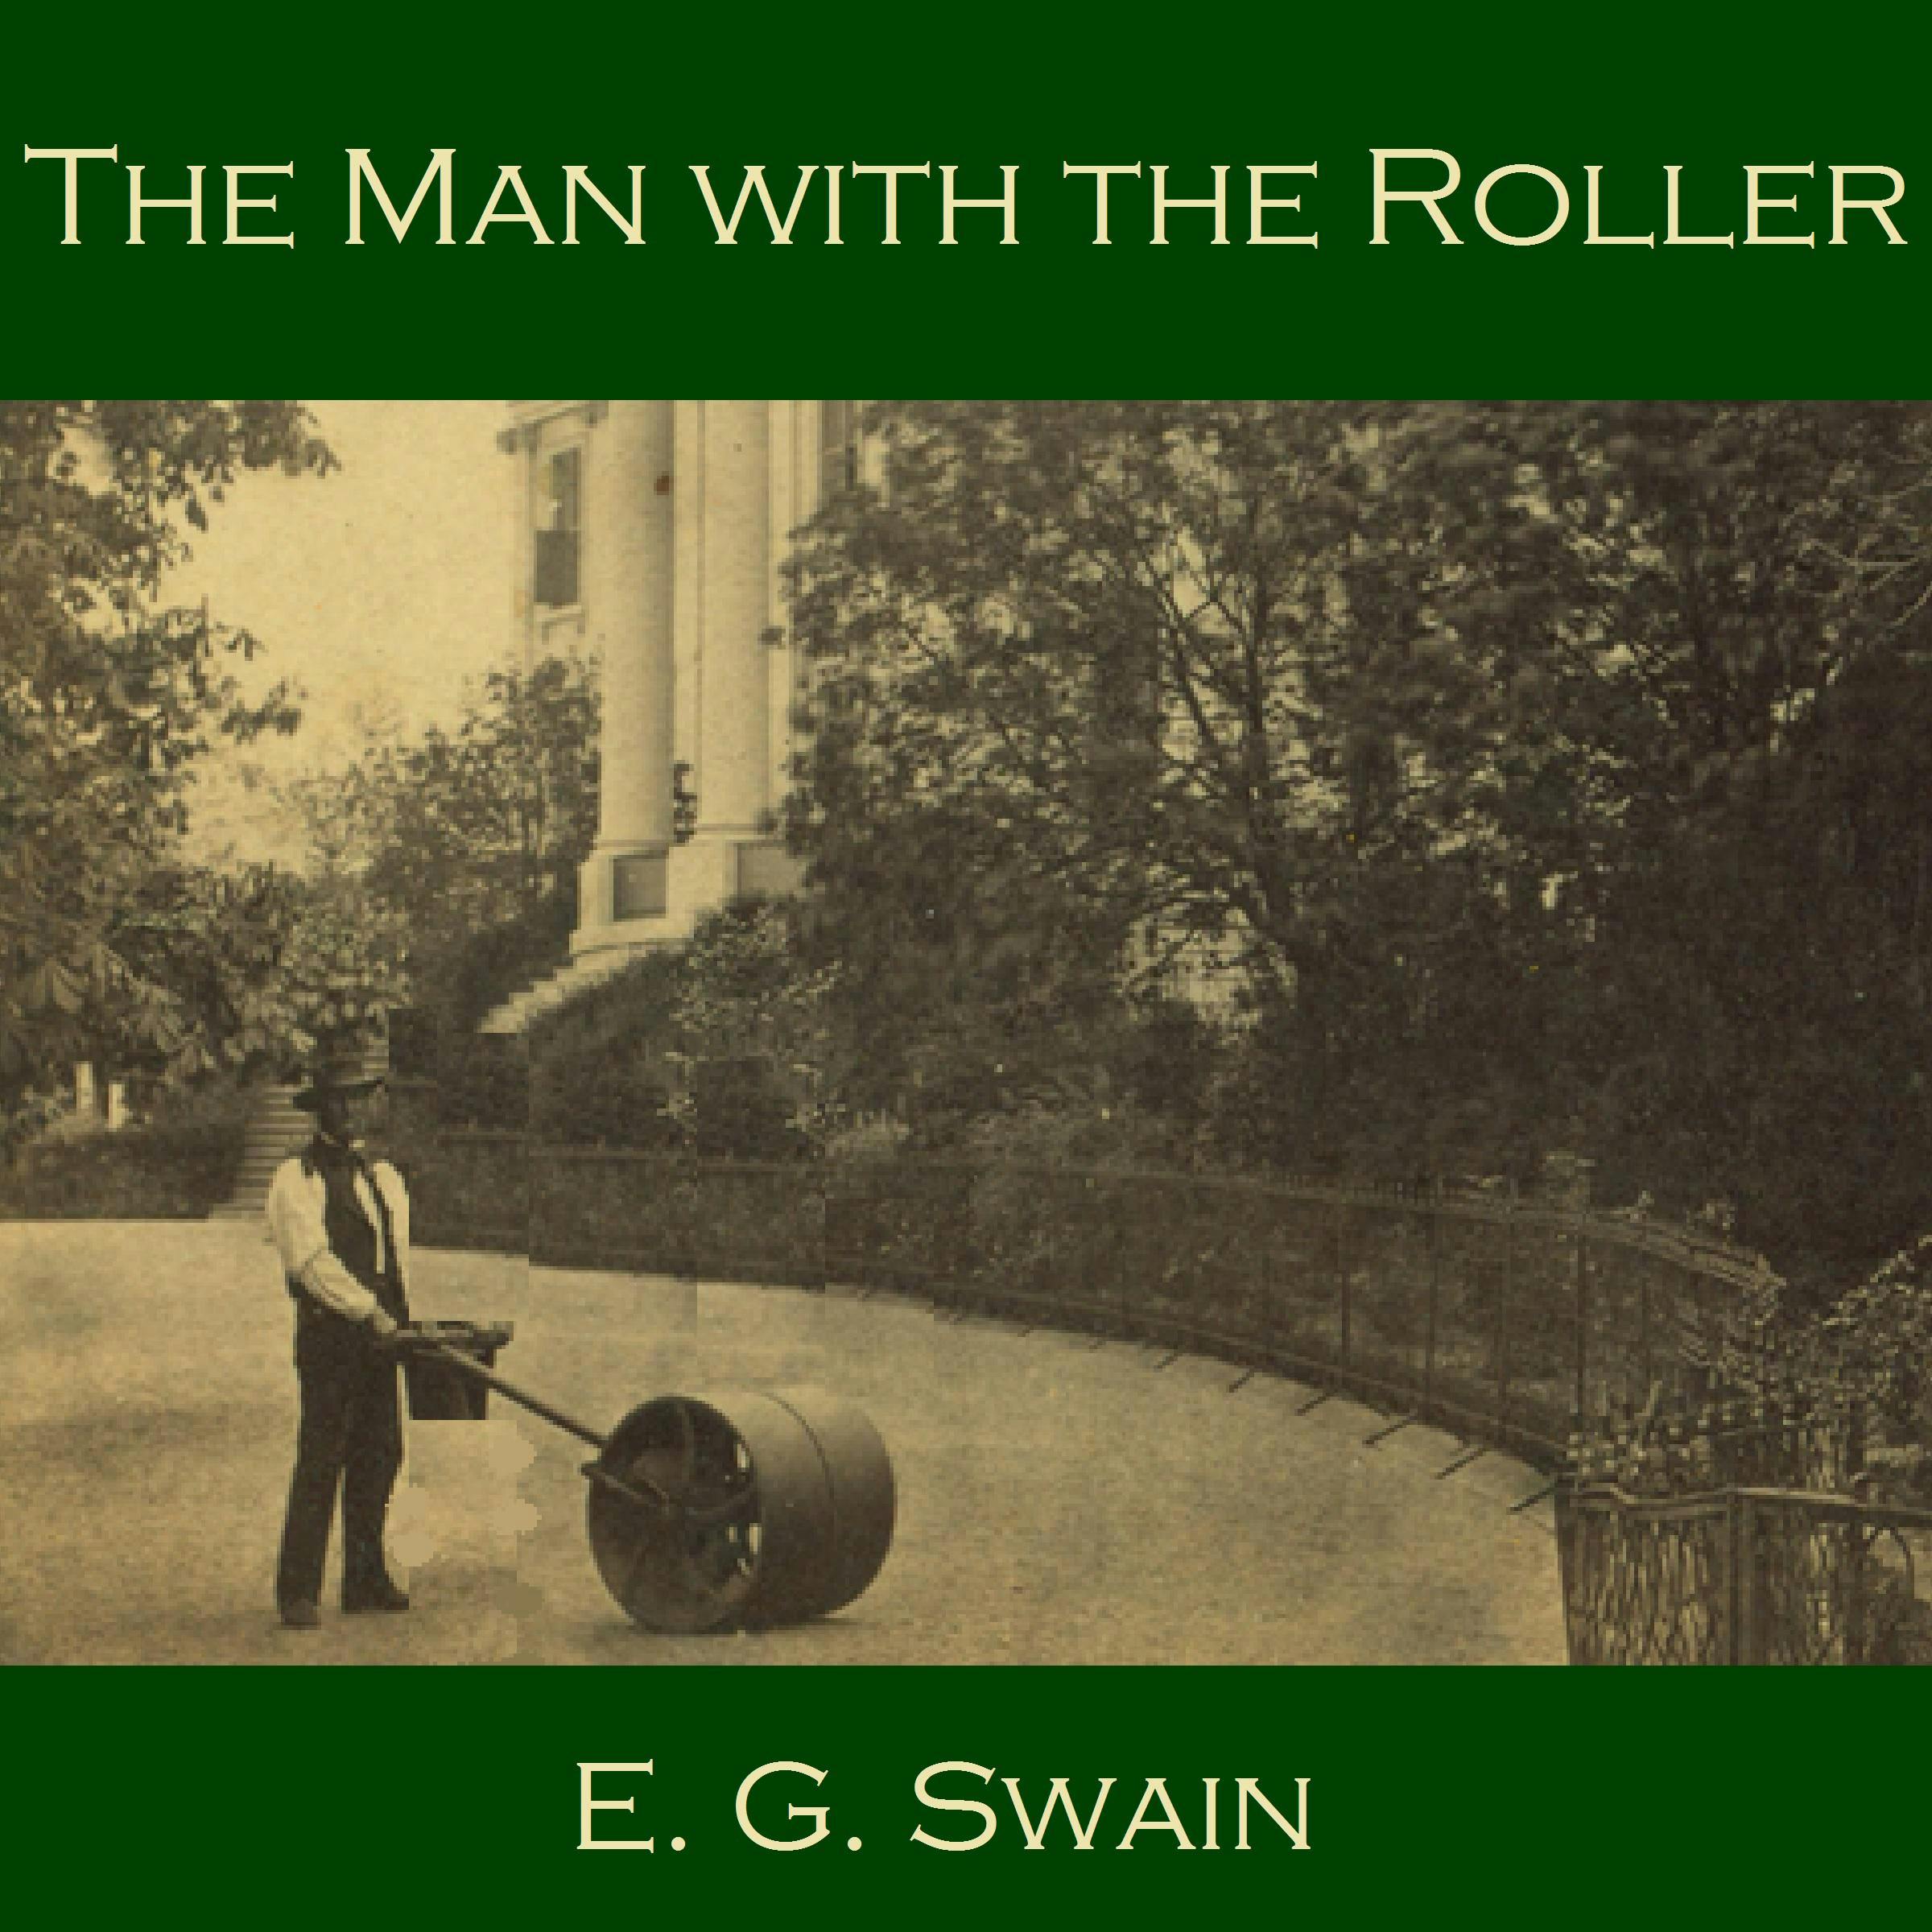 The Man with the Roller - E. G. Swain